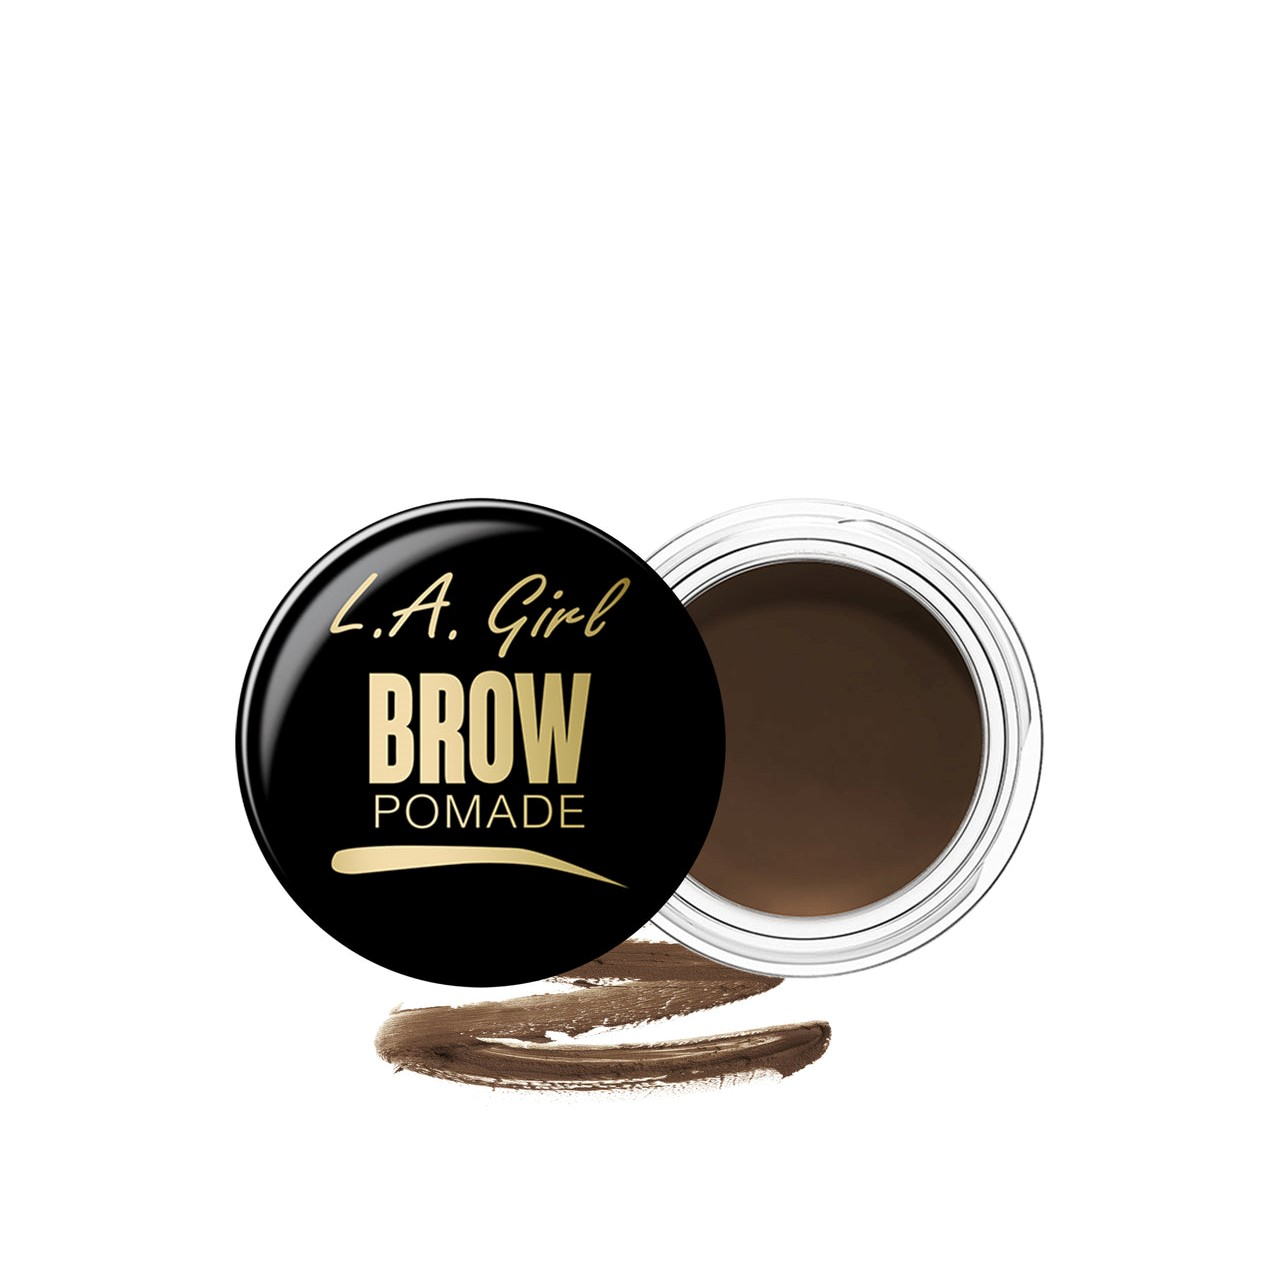 L.A. Girl Brow Pomade Soft Brown 3g